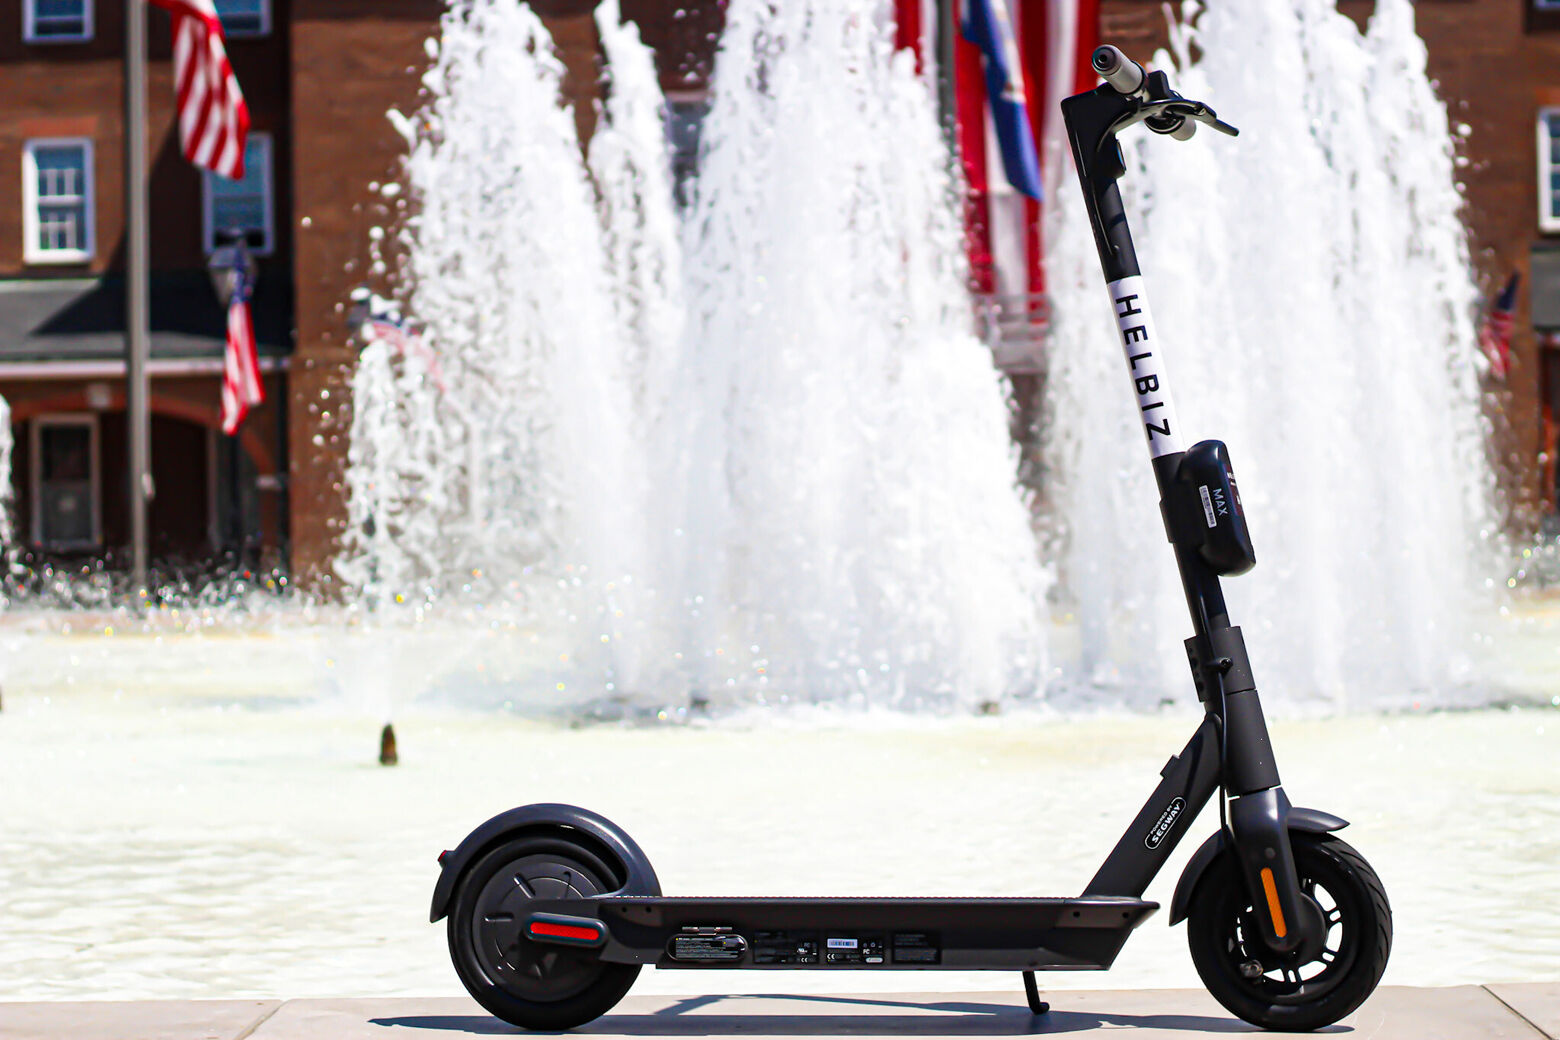 Helbiz Launches E-Scooters in Alexandria and Arlington, Virginia